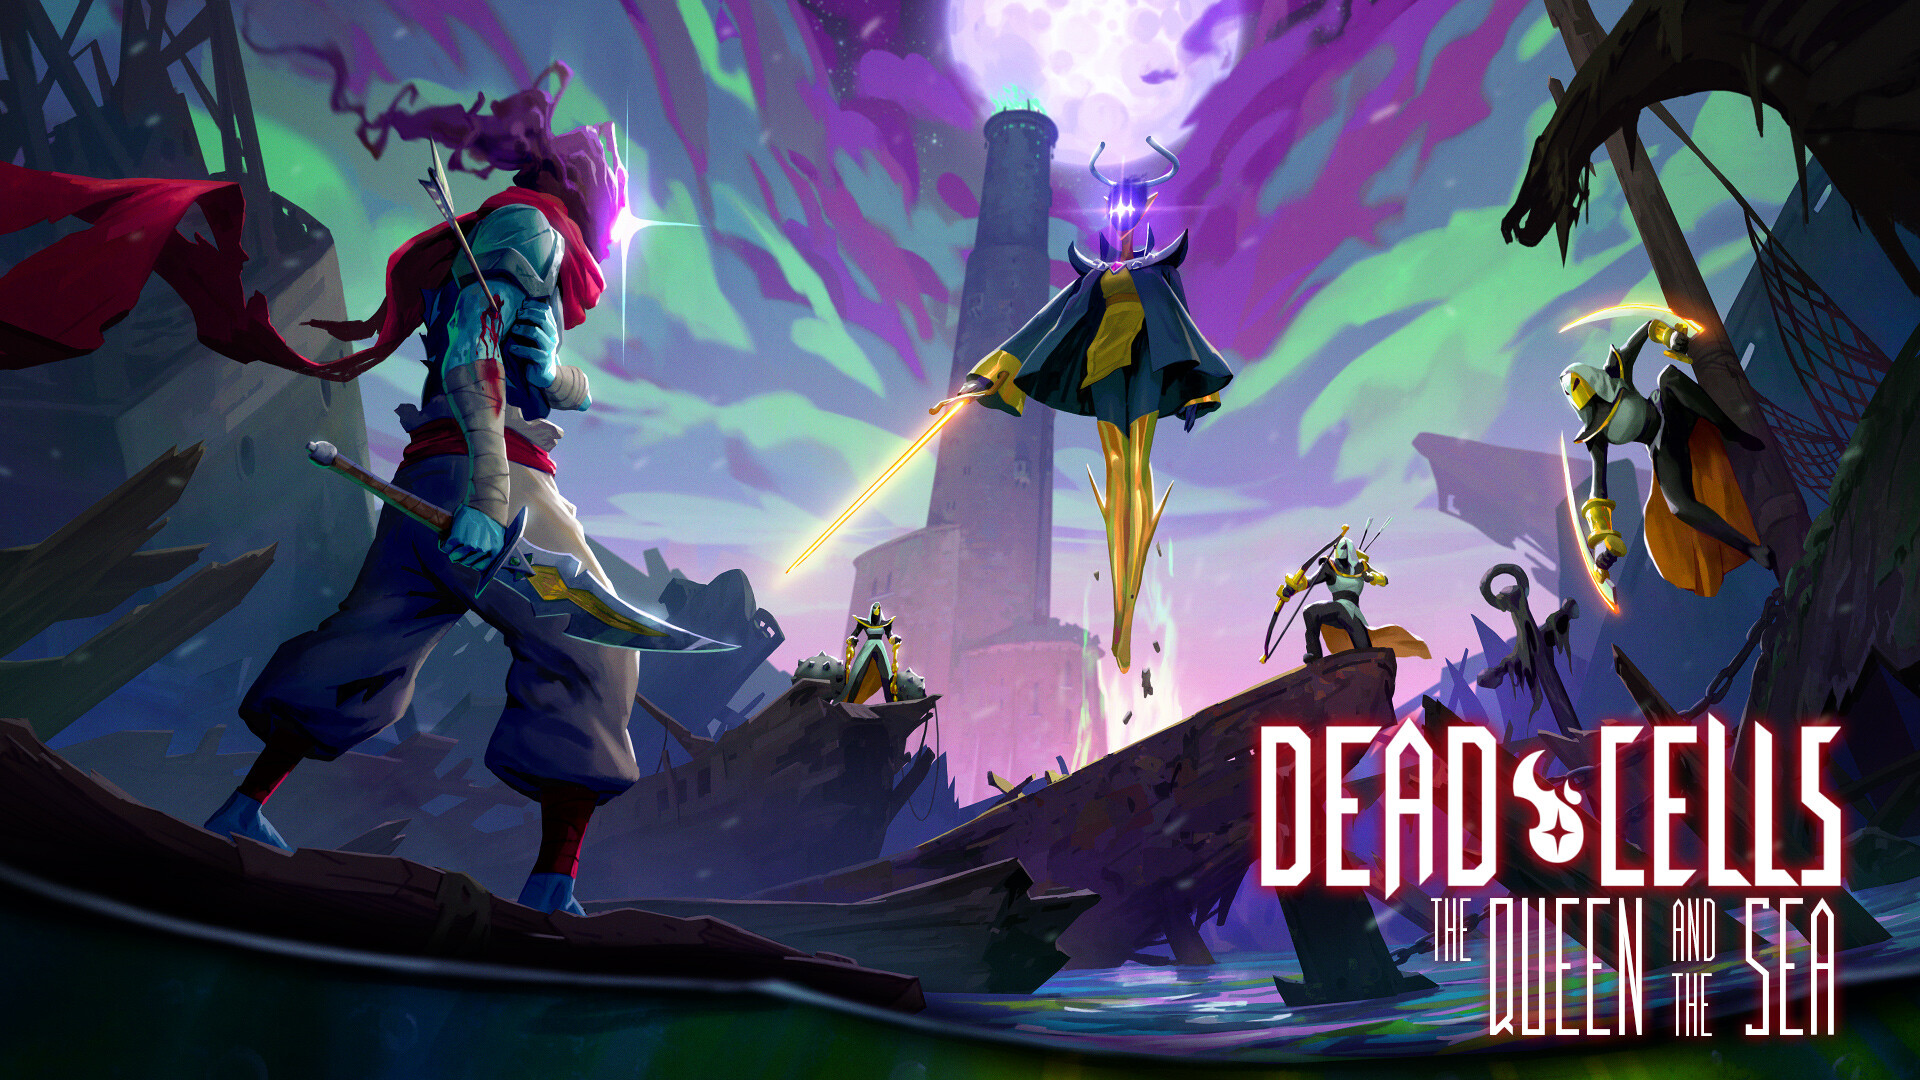 HD wallpaper of Dead Cells game featuring dynamic artwork with a character wielding a sword in a vibrant, mystical setting.